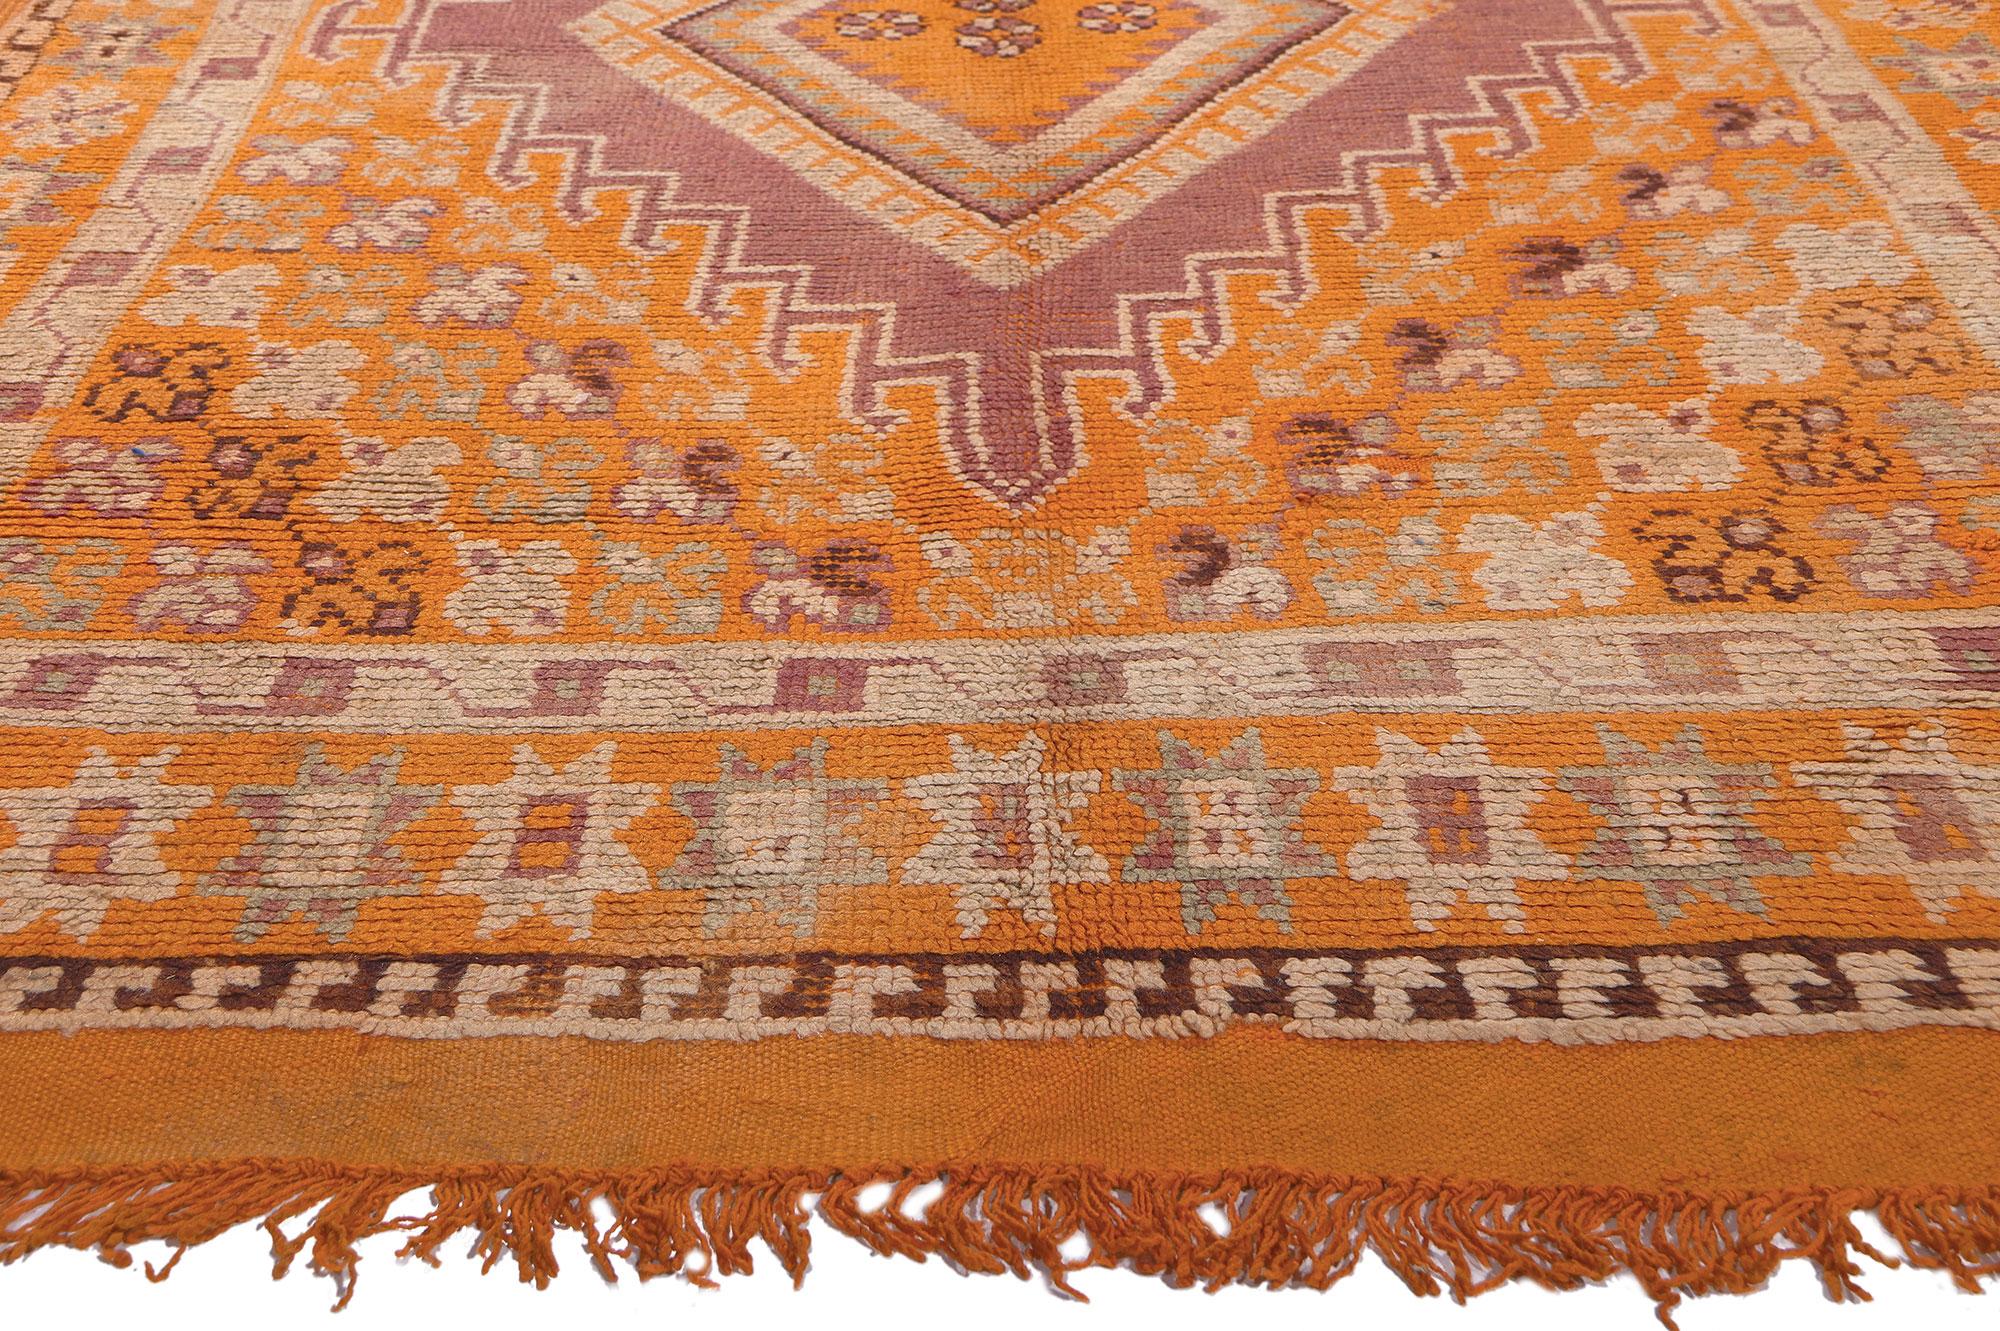 Vintage Orange Taznakht Moroccan Rug, Tribal Enchantment Meets Bold Bohemian In Good Condition For Sale In Dallas, TX